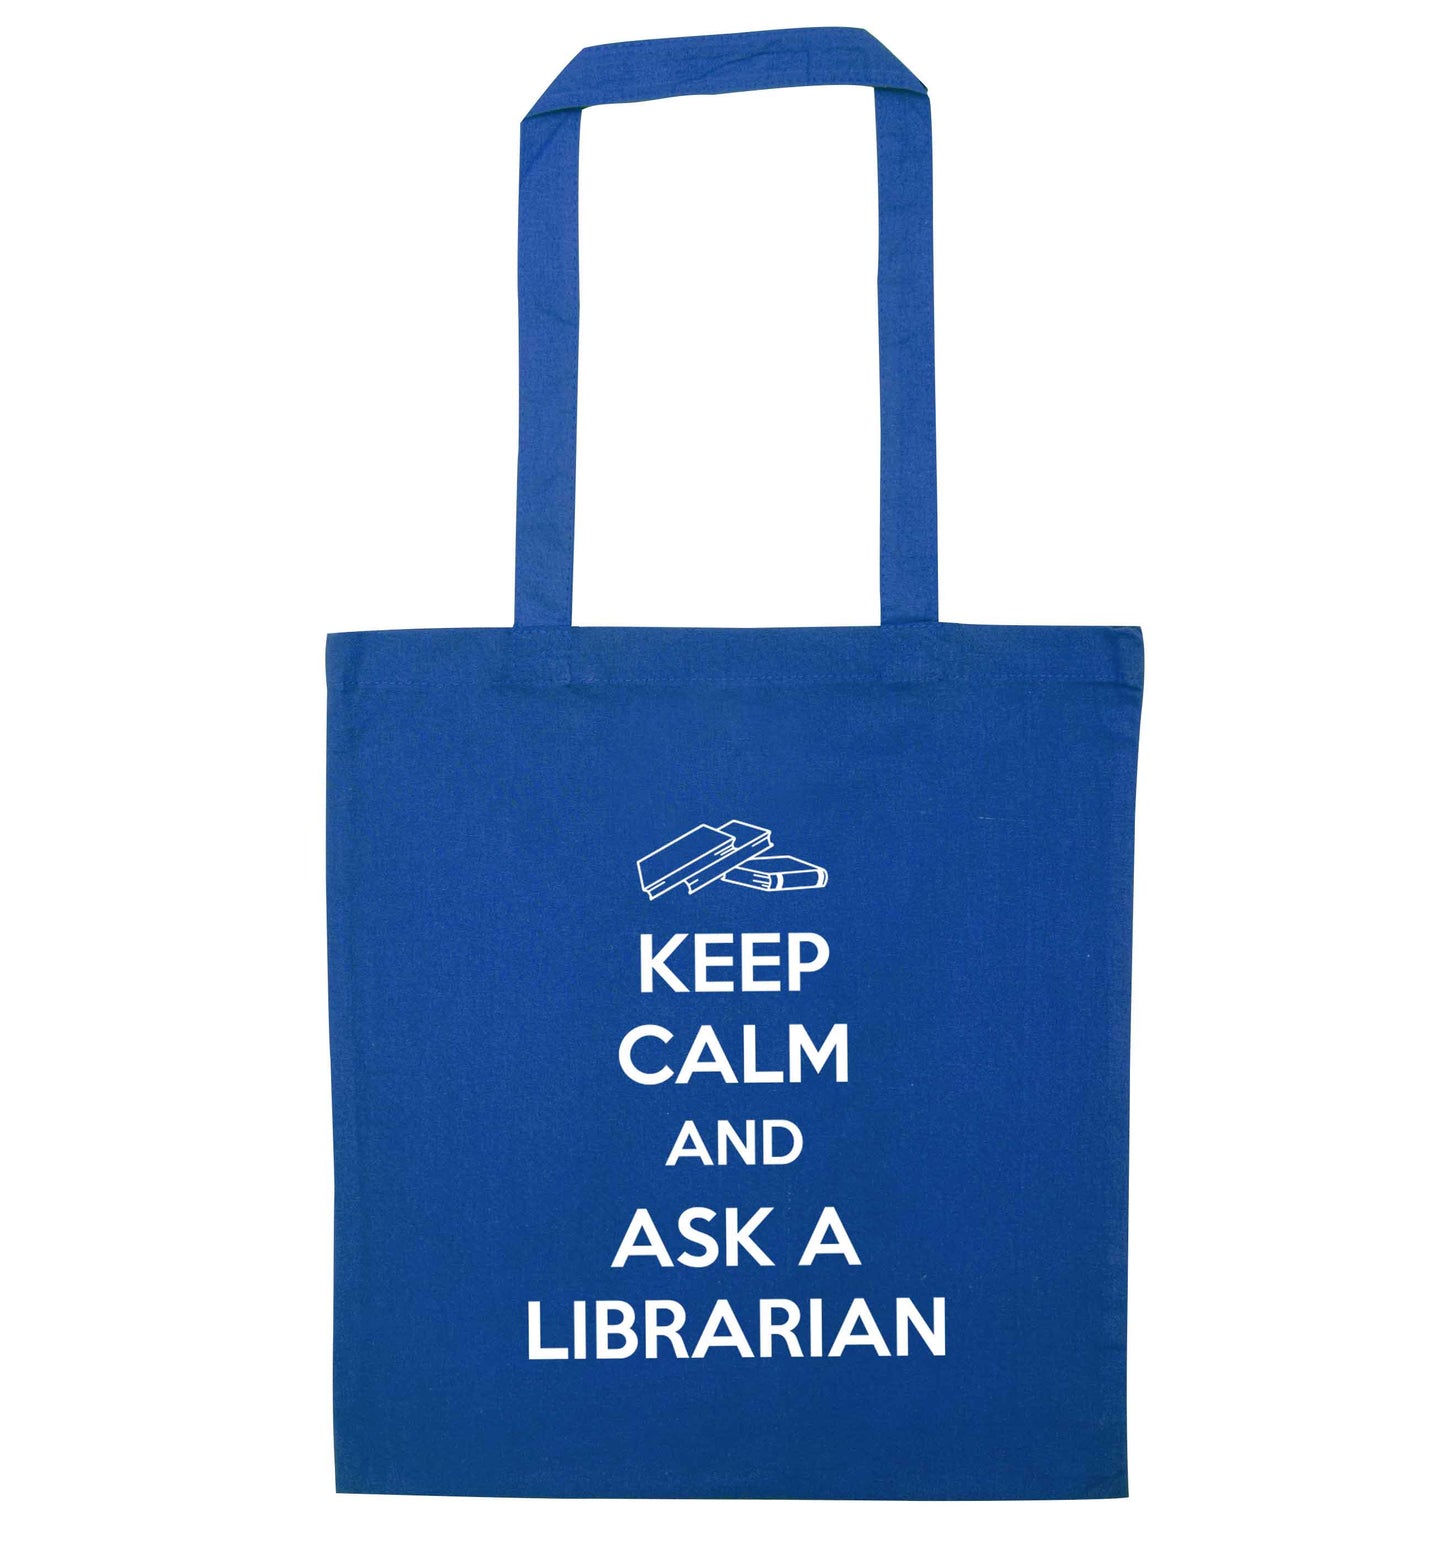 Keep calm and ask a librarian blue tote bag